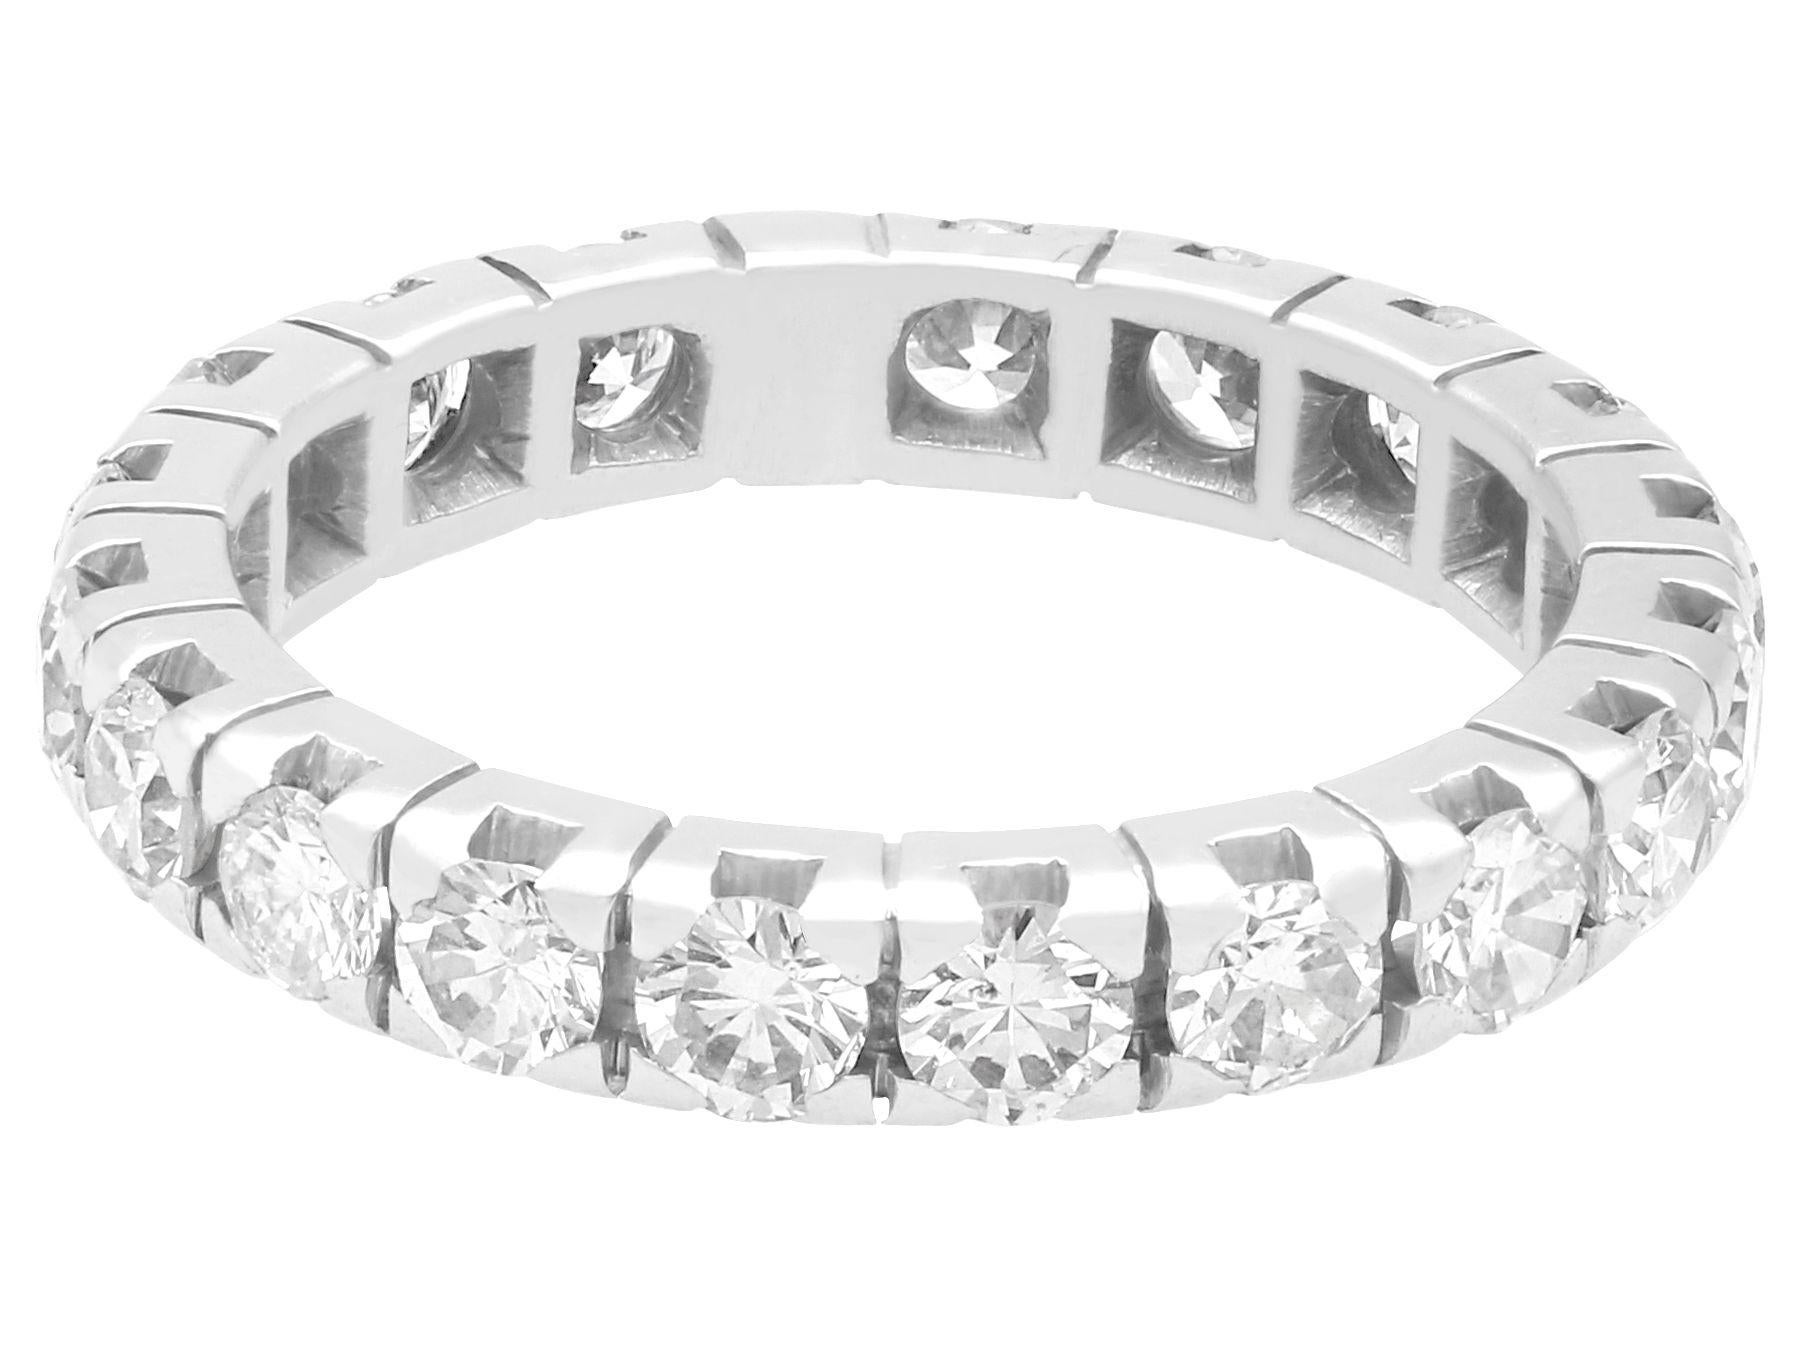 A stunning, fine and impressive vintage French 1.62 carat diamond and 18 karat white gold full eternity ring; part of our diverse diamond jewelry and estate jewelry collections

This stunning, fine and impressive diamond eternity ring has been